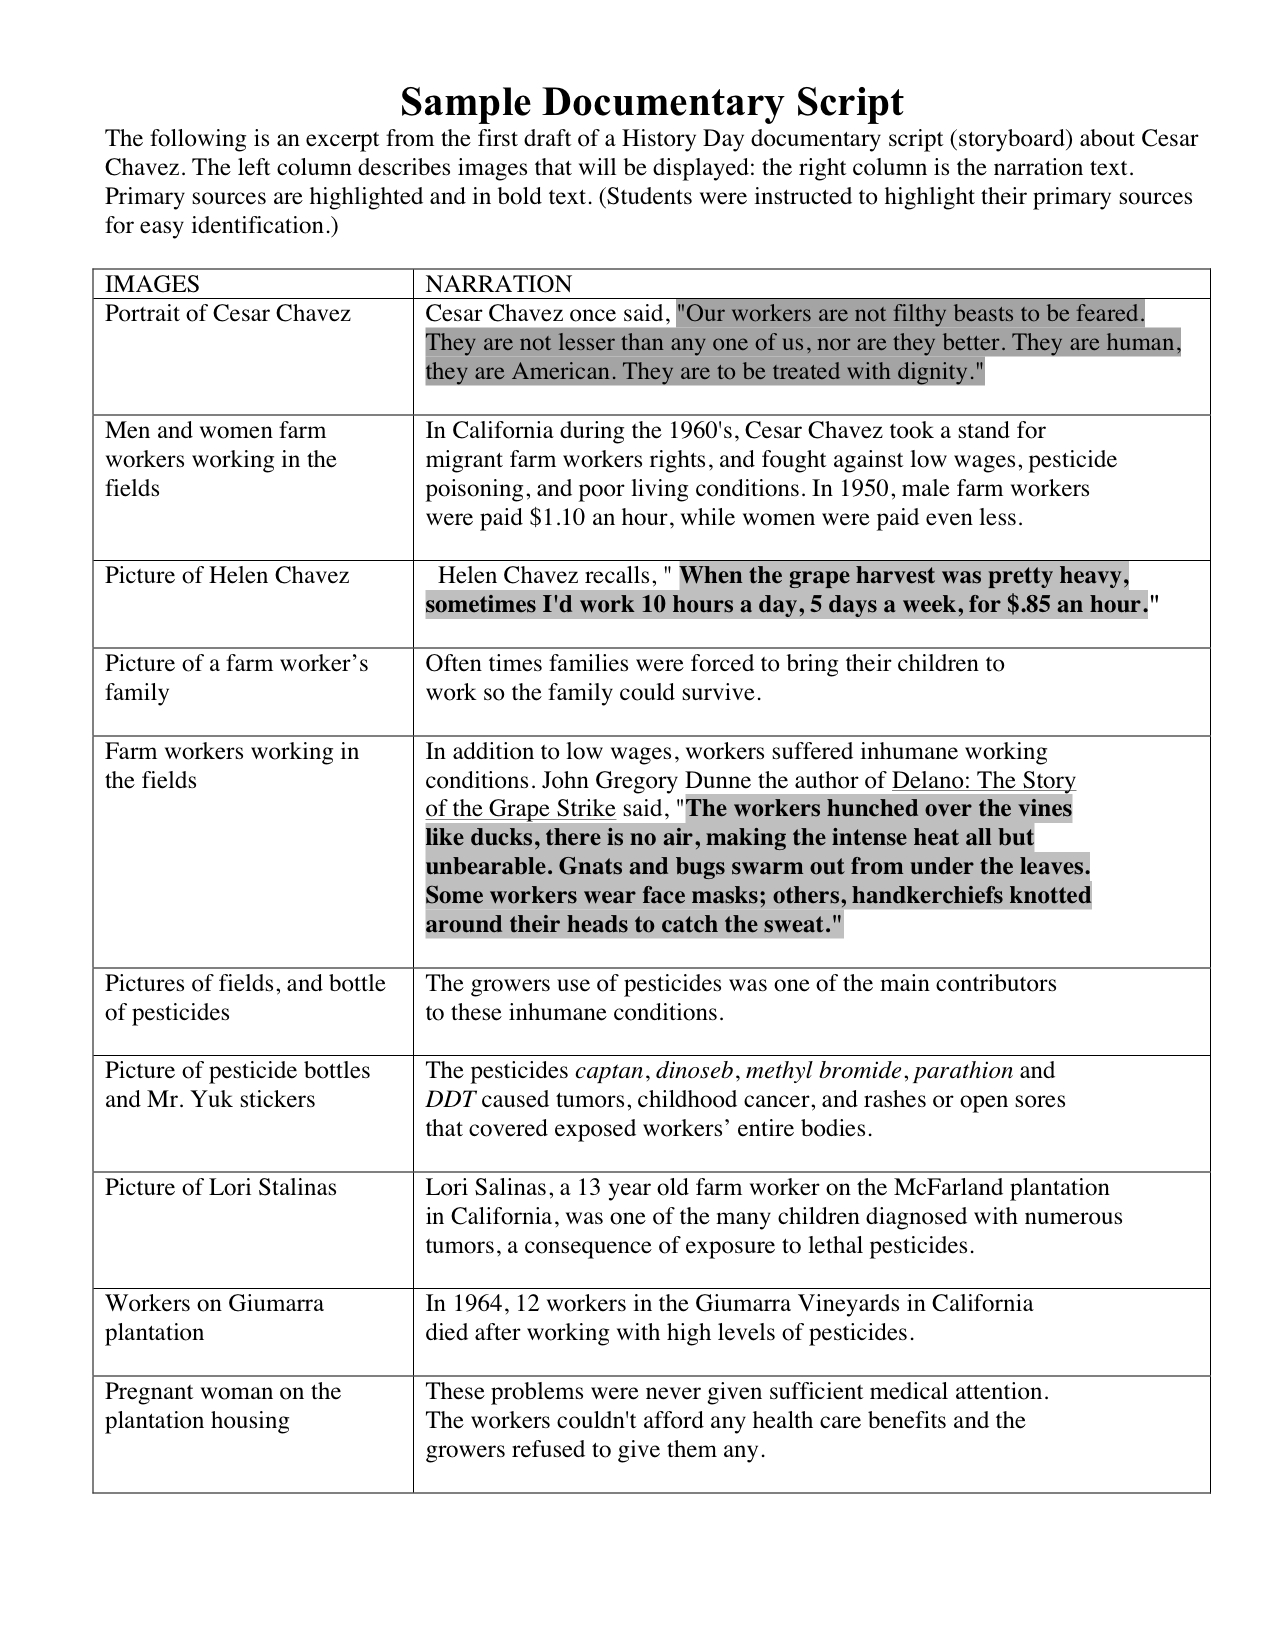 17+ Documentary Script Outline Examples - PDF  Examples